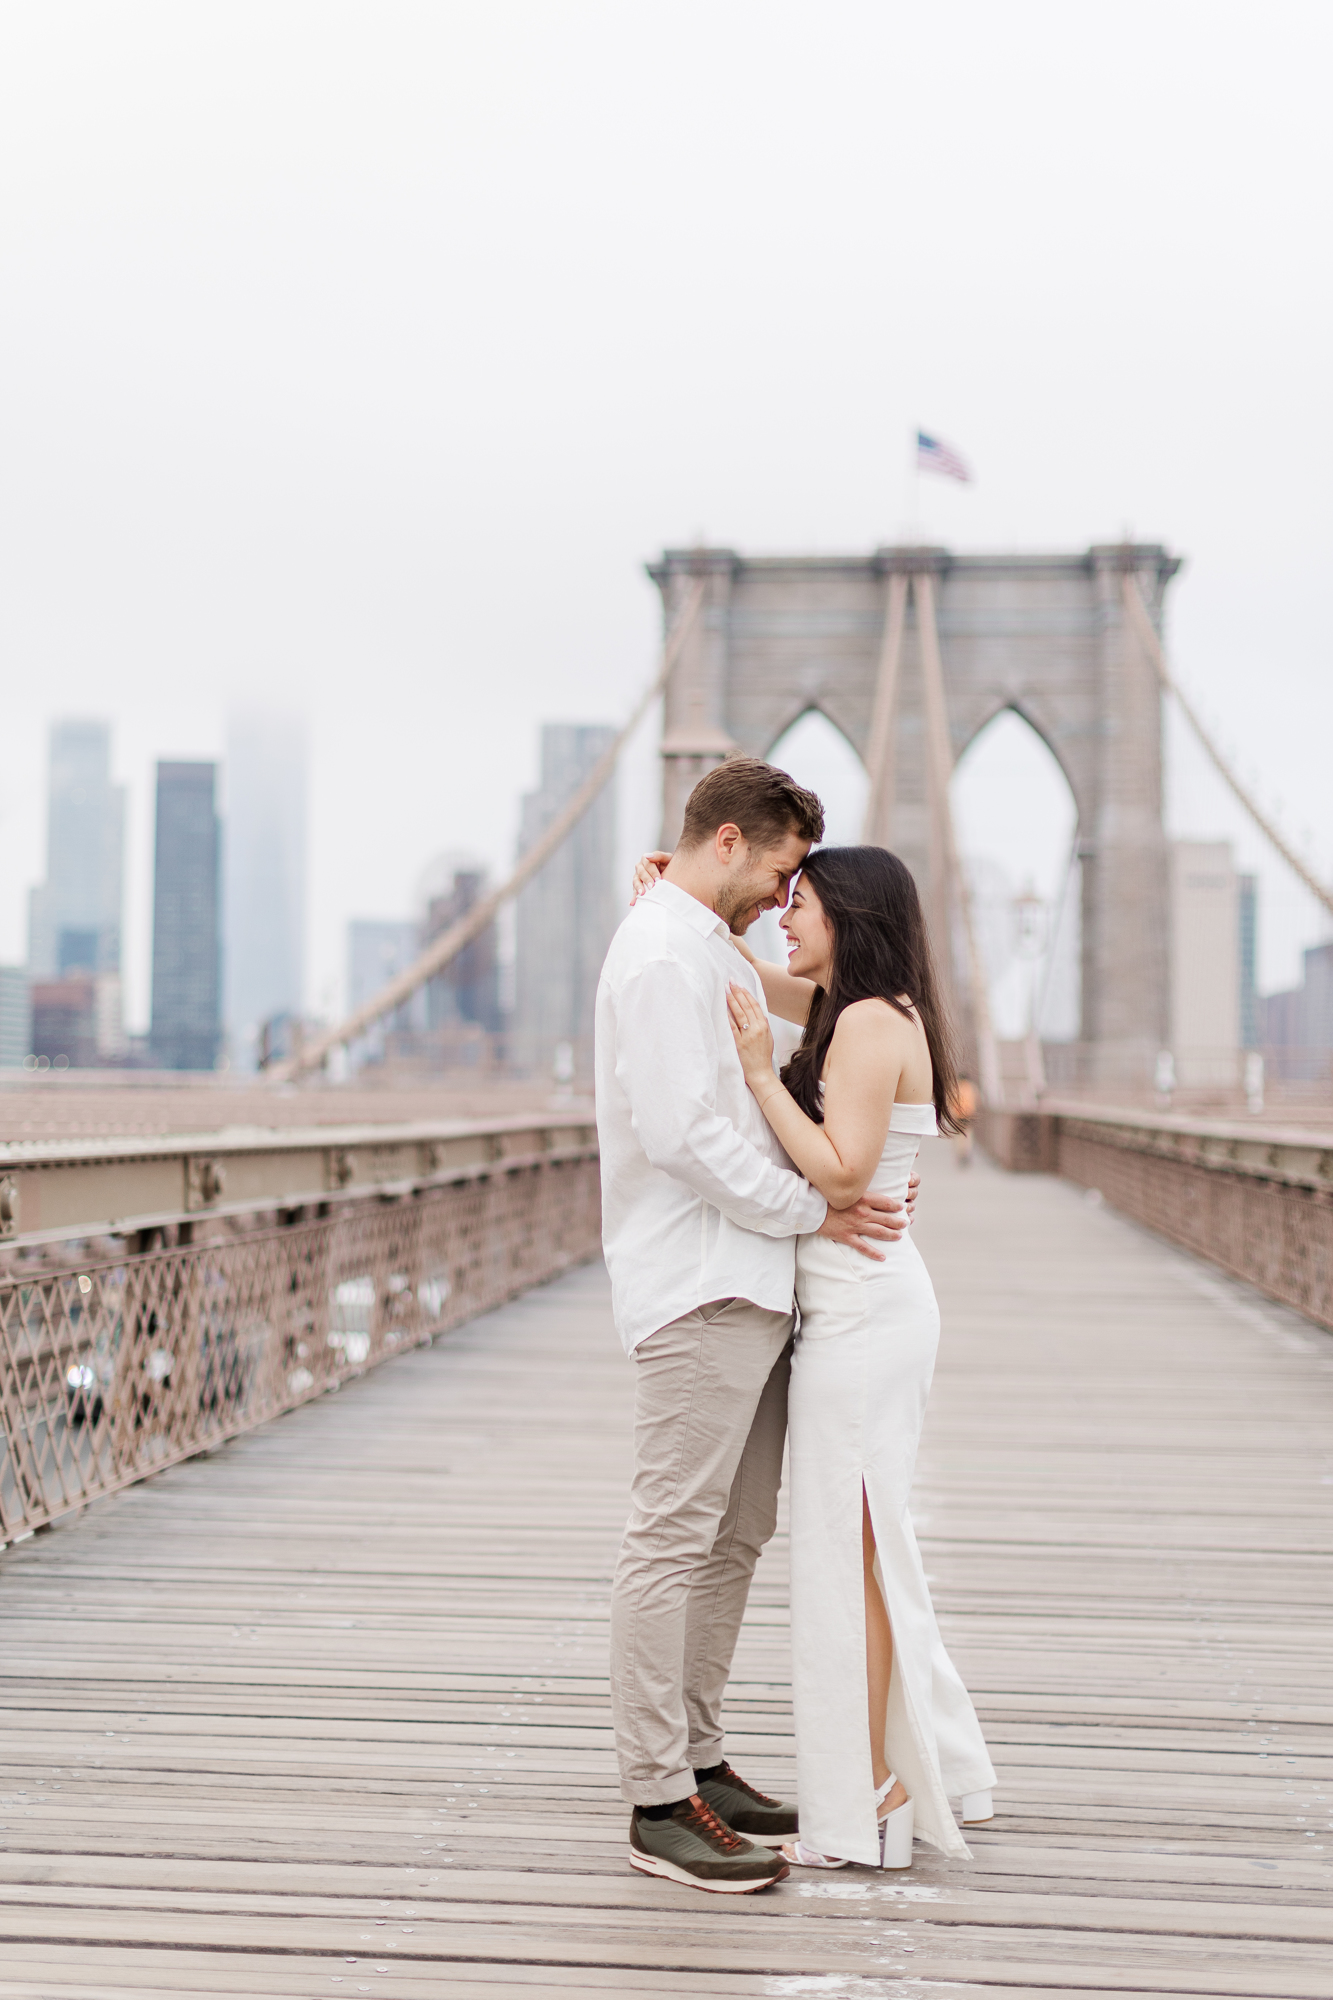 Awesome Engagement Photography on the Brooklyn Bridge